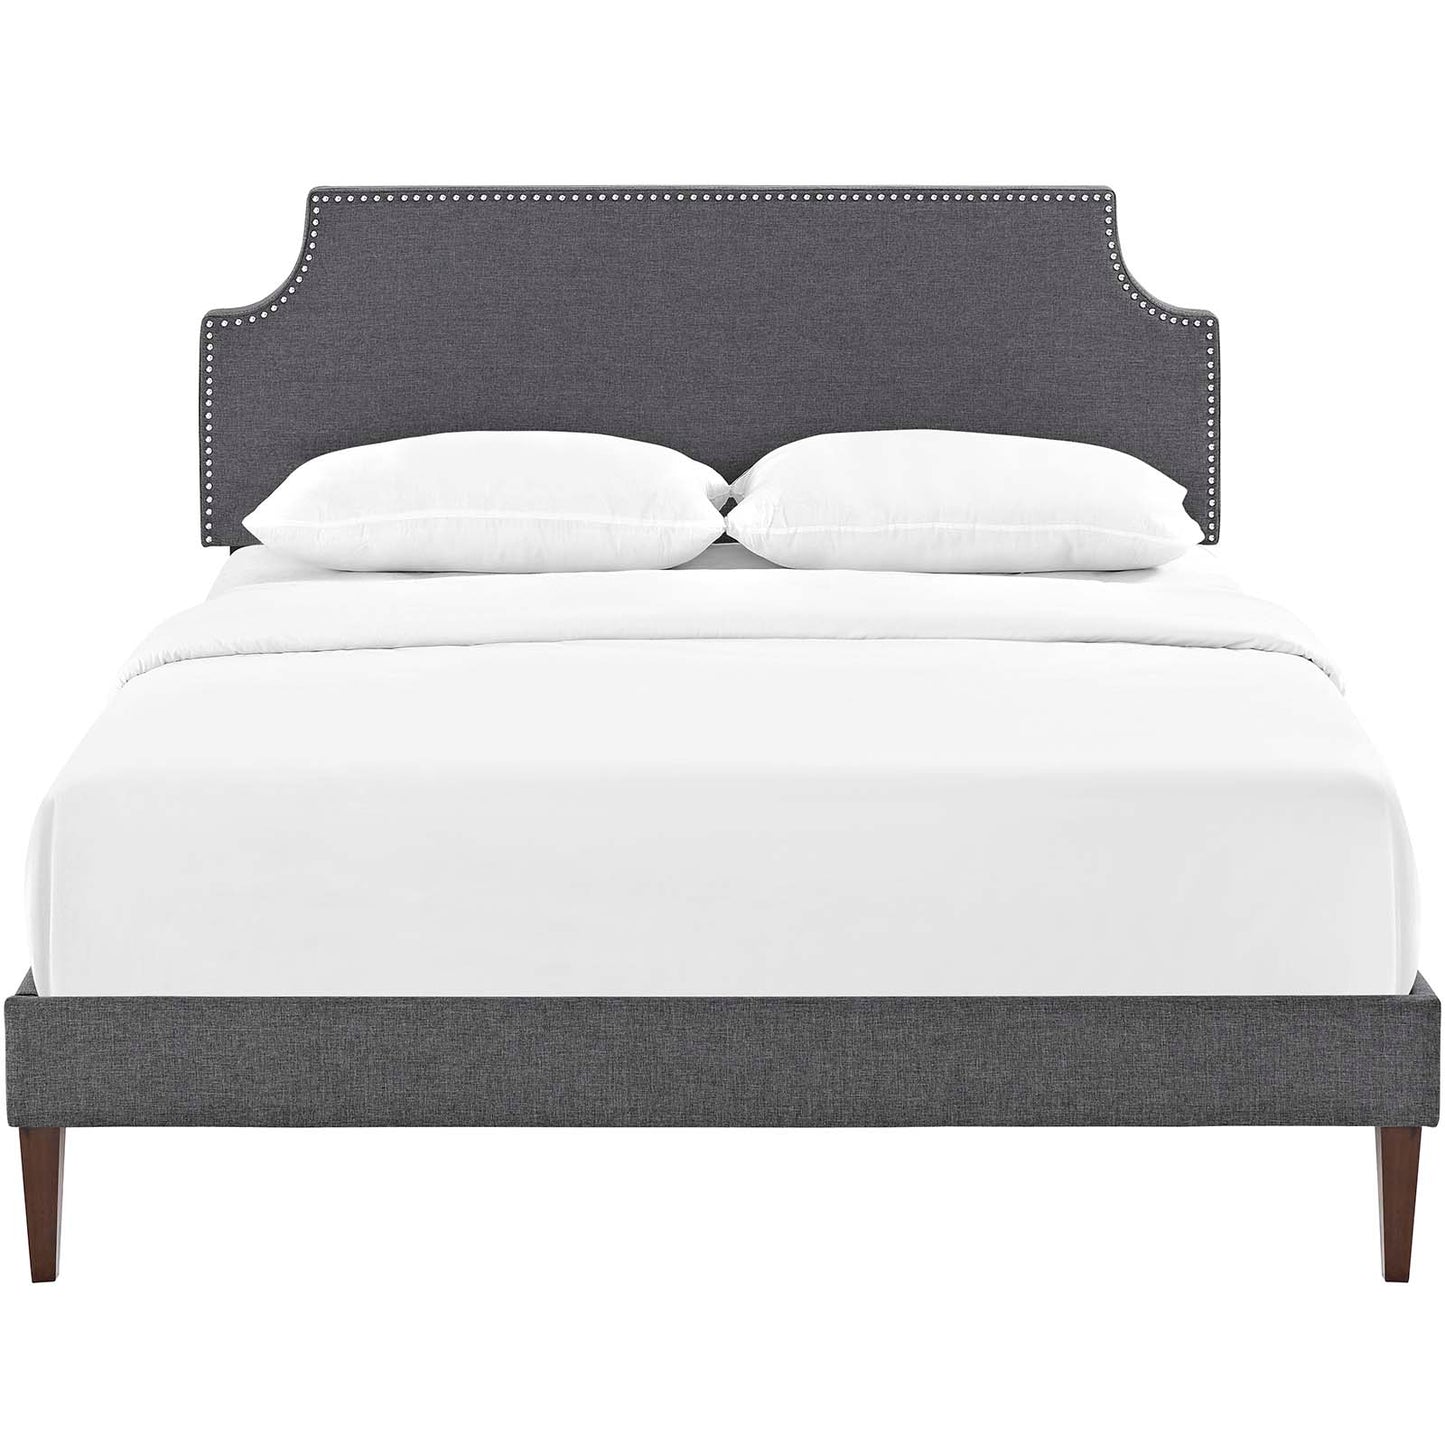 Corene King Fabric Platform Bed with Squared Tapered Legs Gray MOD-5957-GRY